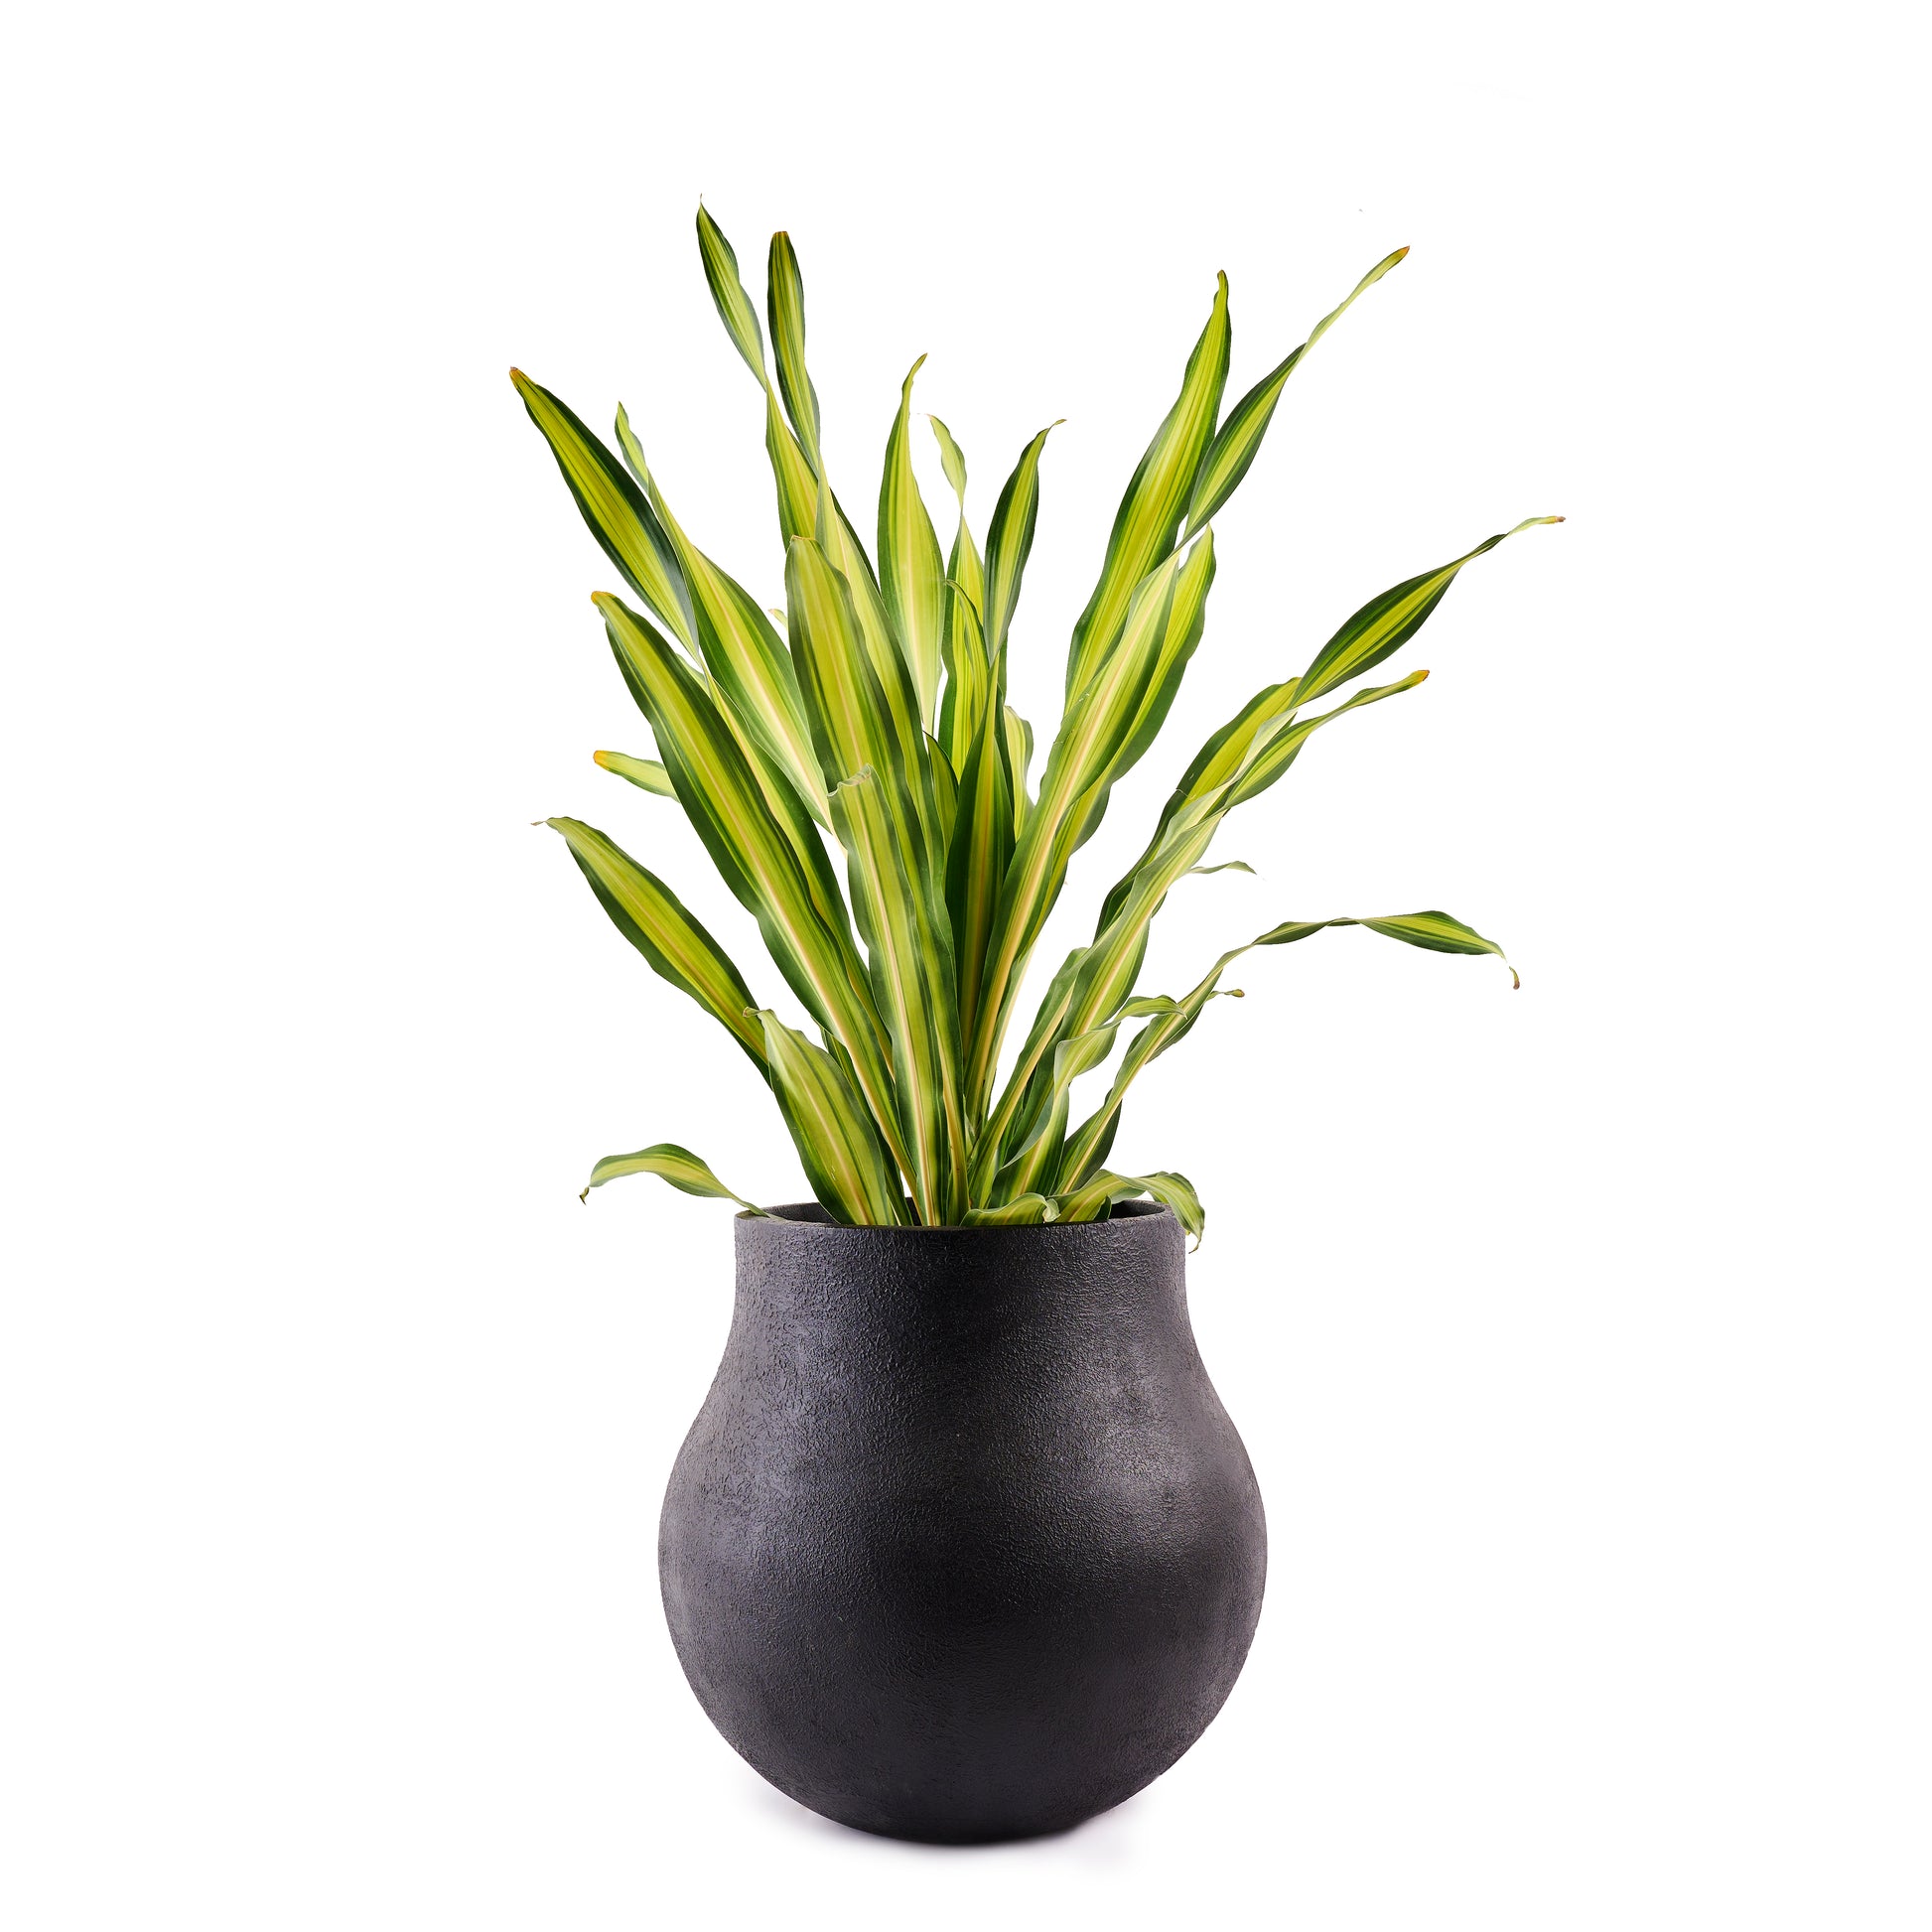 The Black Zuri round FRP Planter by Palasa is an ideal fit for classic and contemporary residences and gardens. This Large plant pot can be used indoors and outdoors.